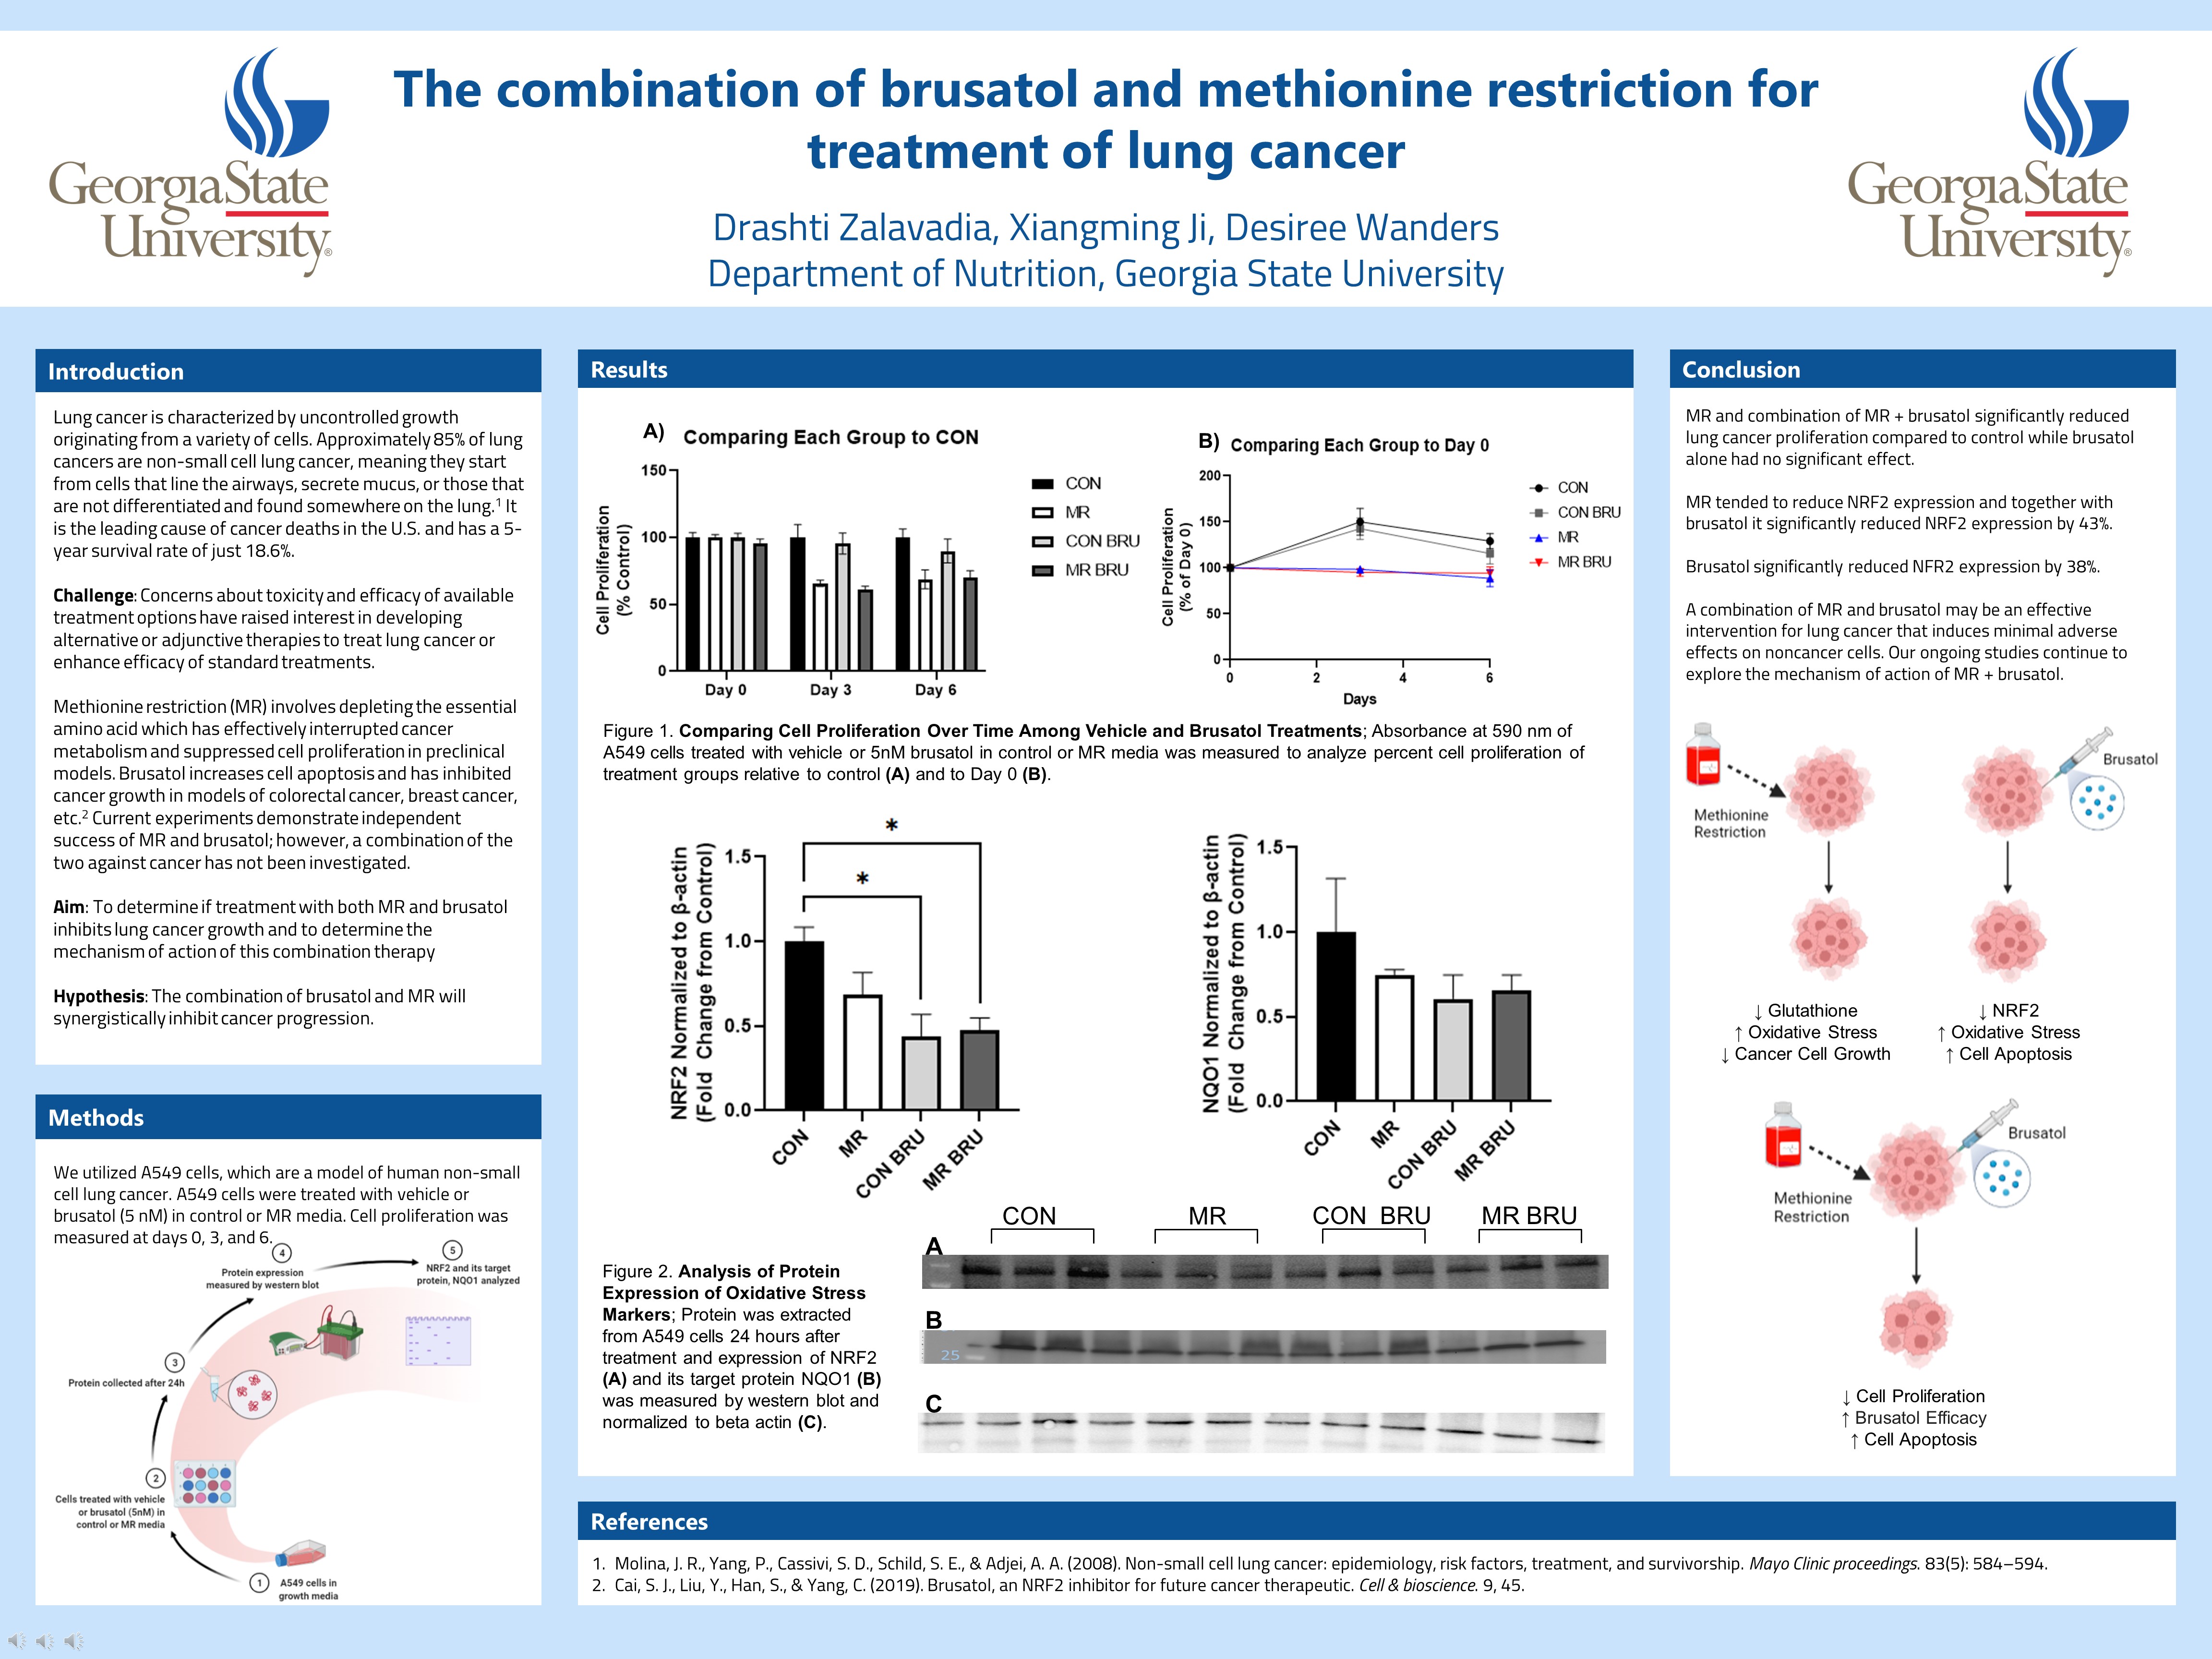 Showcase Image for The combination of brusatol and methionine restriction for treatment of lung cancer